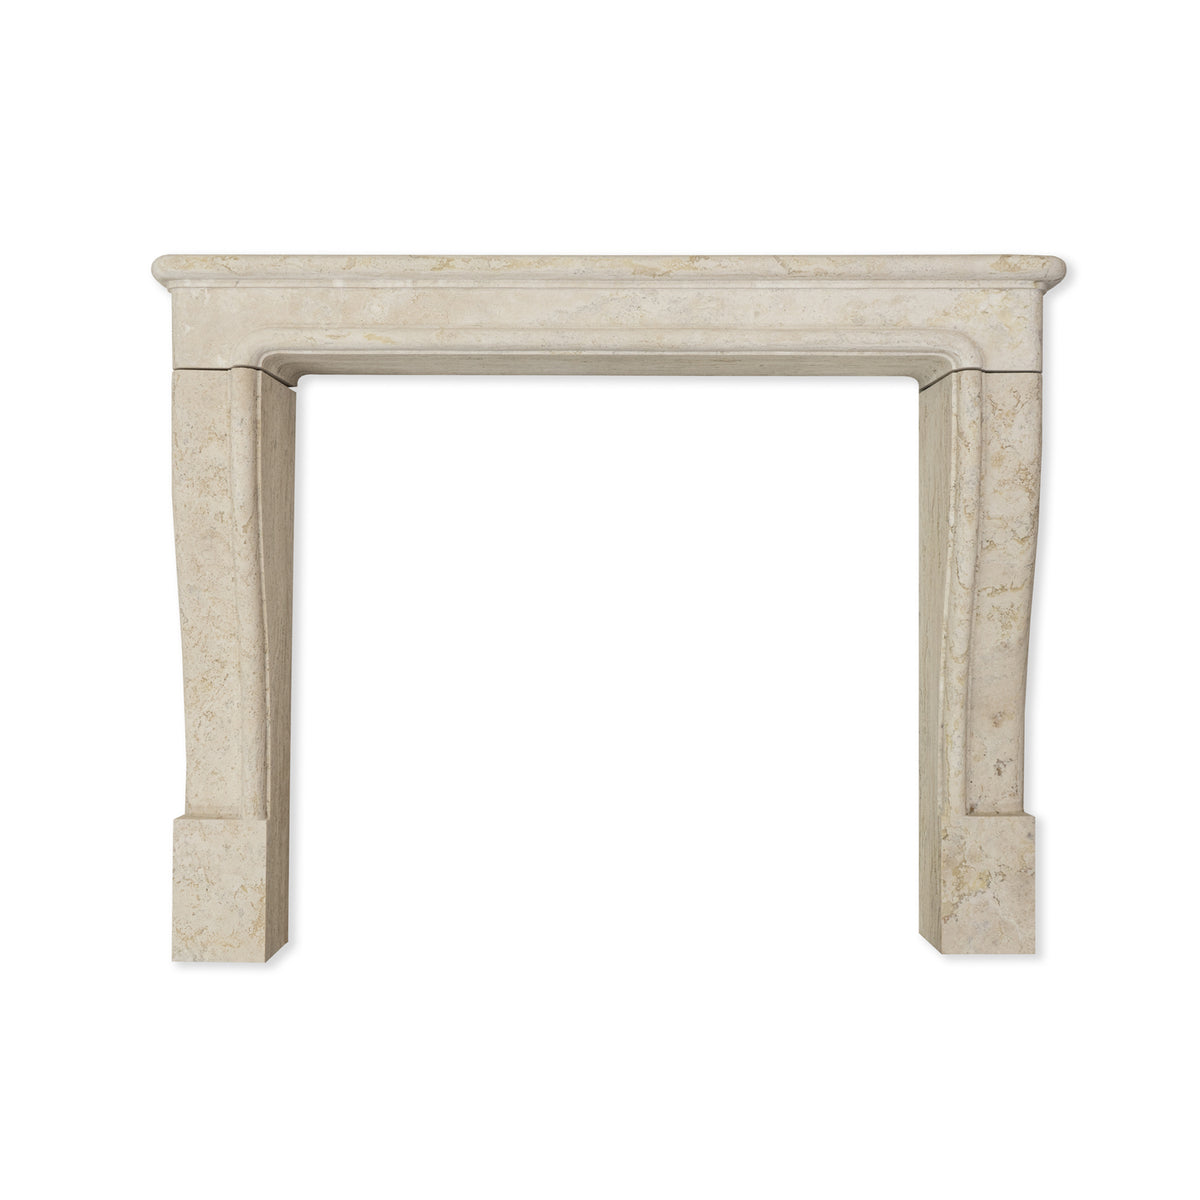 Hobson Fireplace in Maderno Travertine with Honed Finish (Extended Range) Main Product Slider View